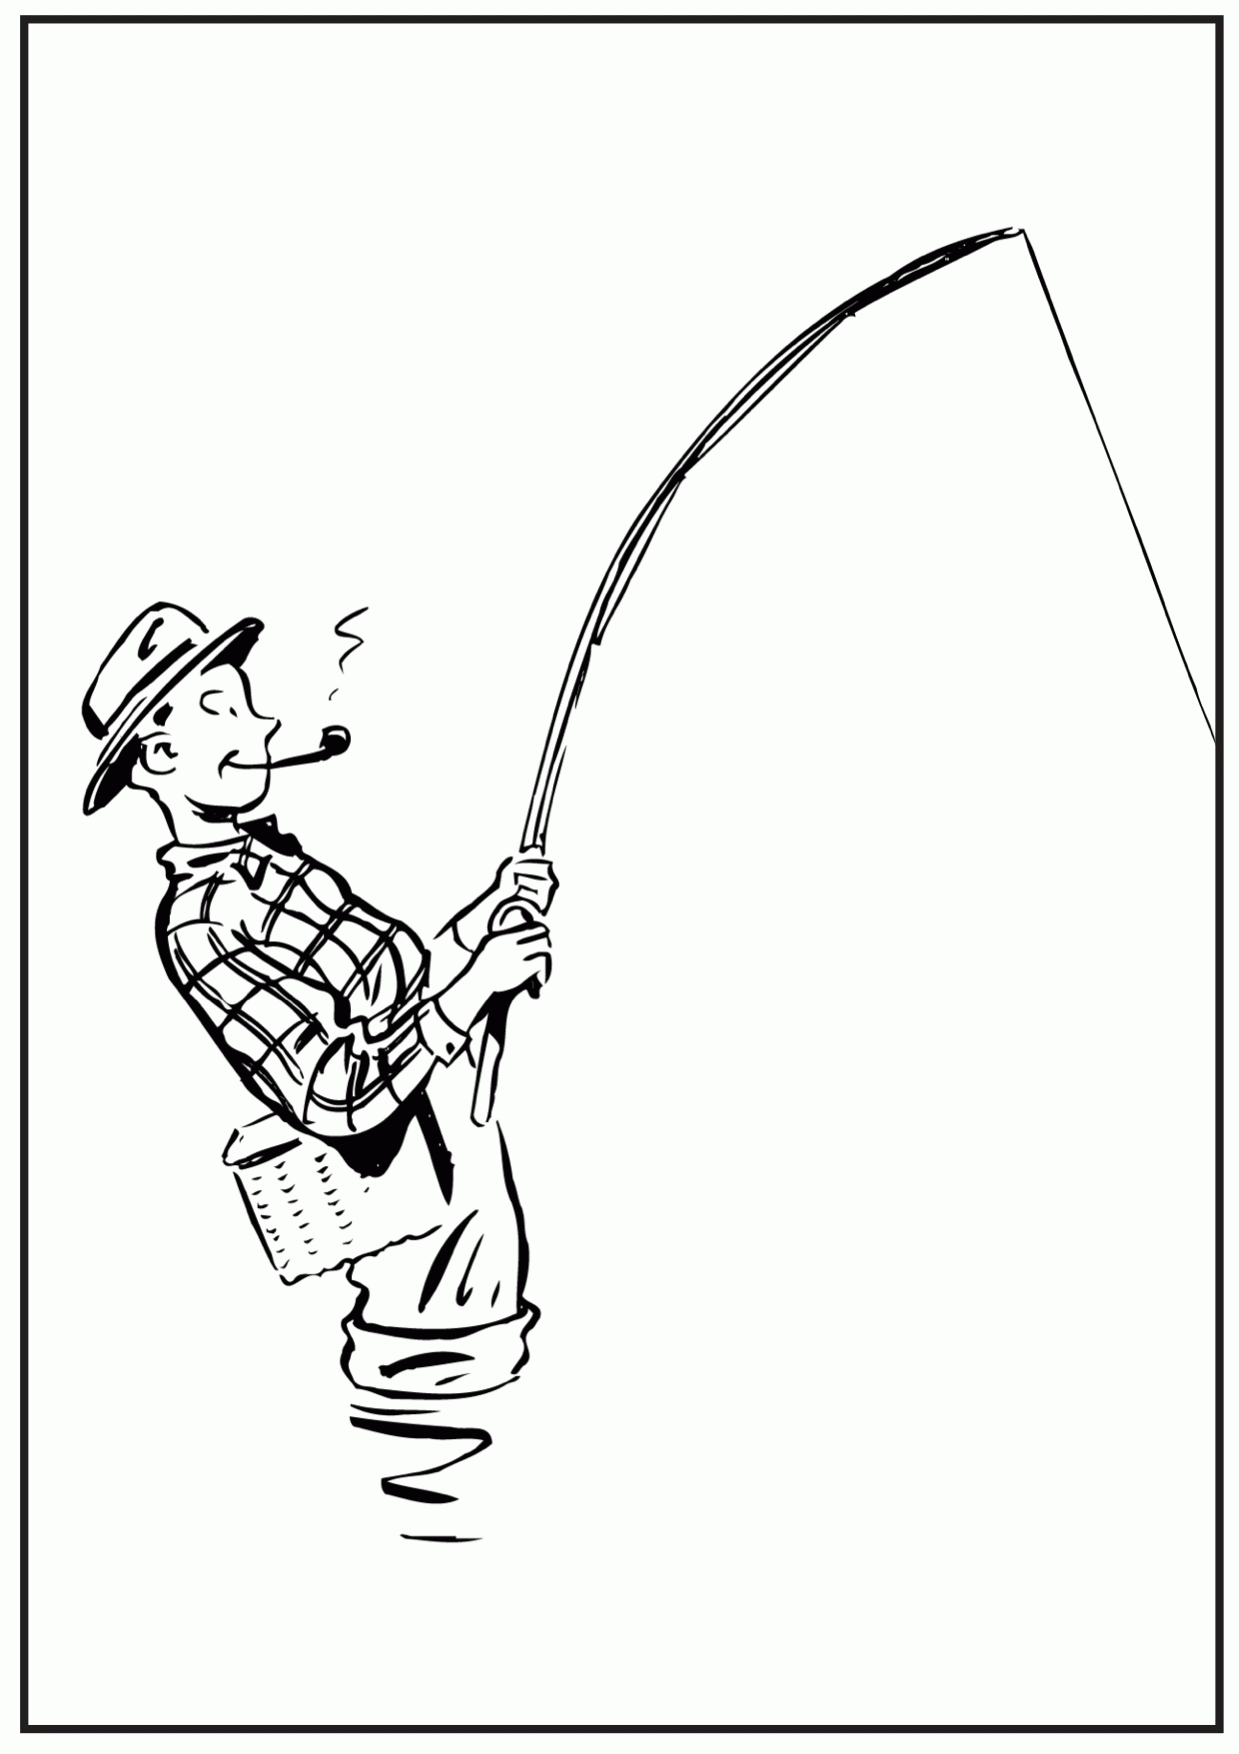 Boy Fishing Coloring Page - Coloring Home